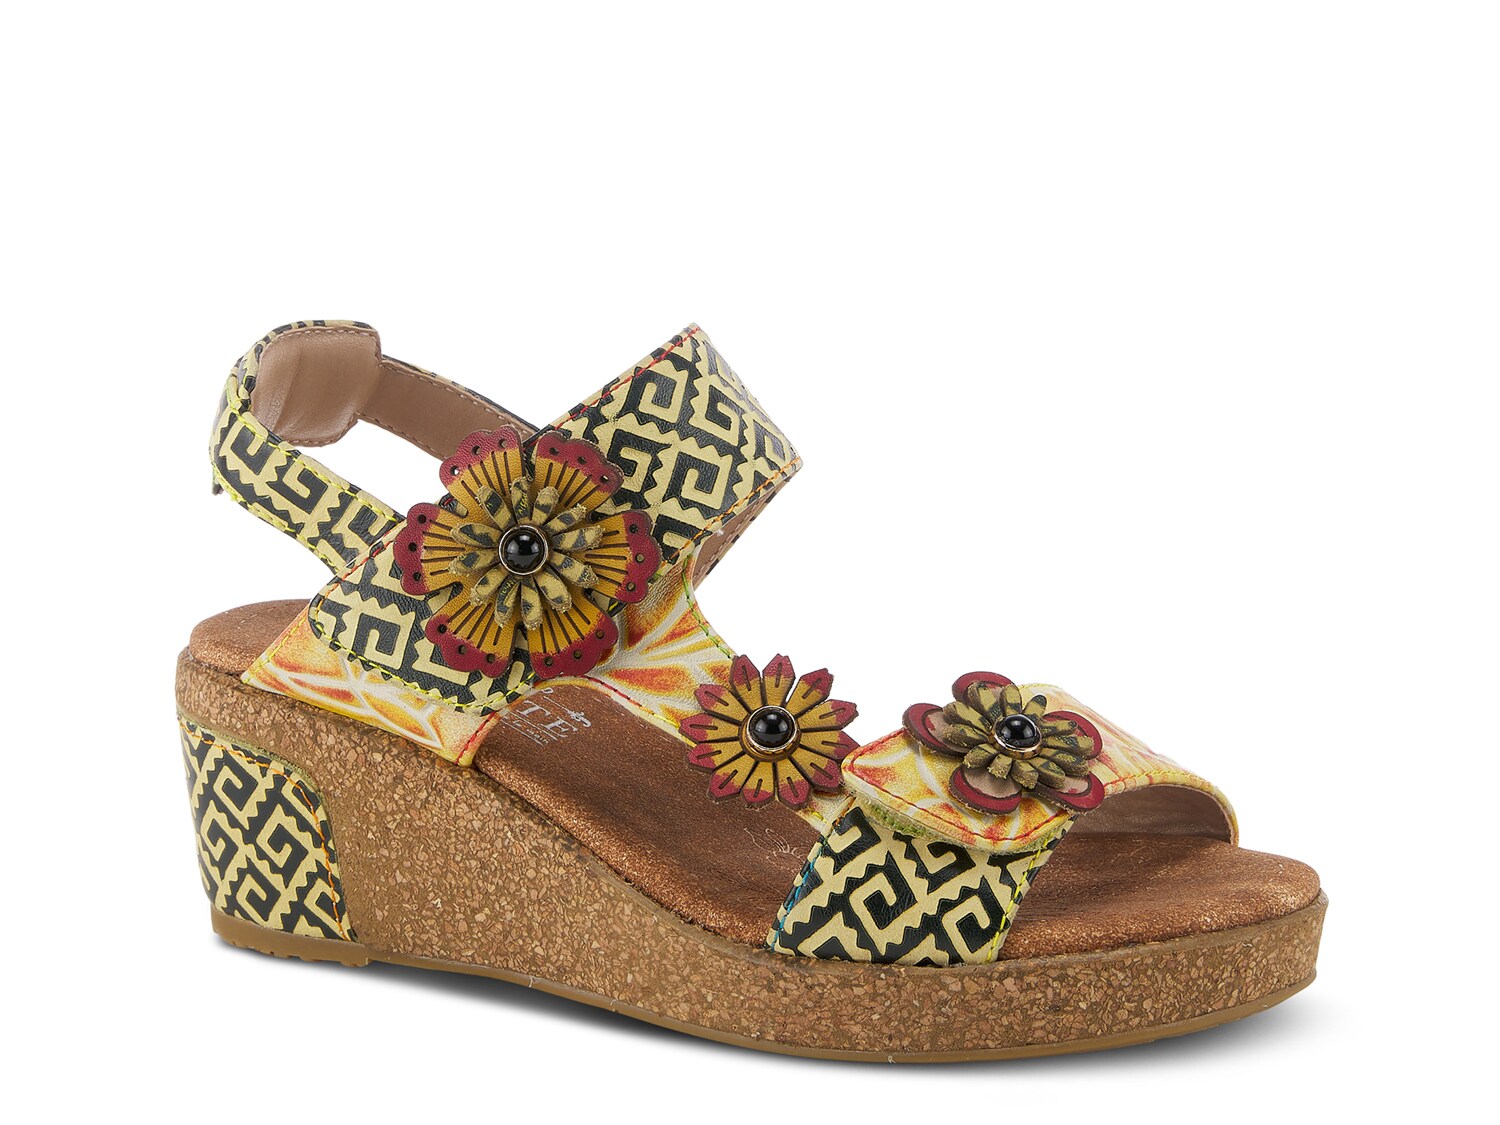 L'Artiste by Spring Step Radd Wedge Sandal - Free Shipping | DSW